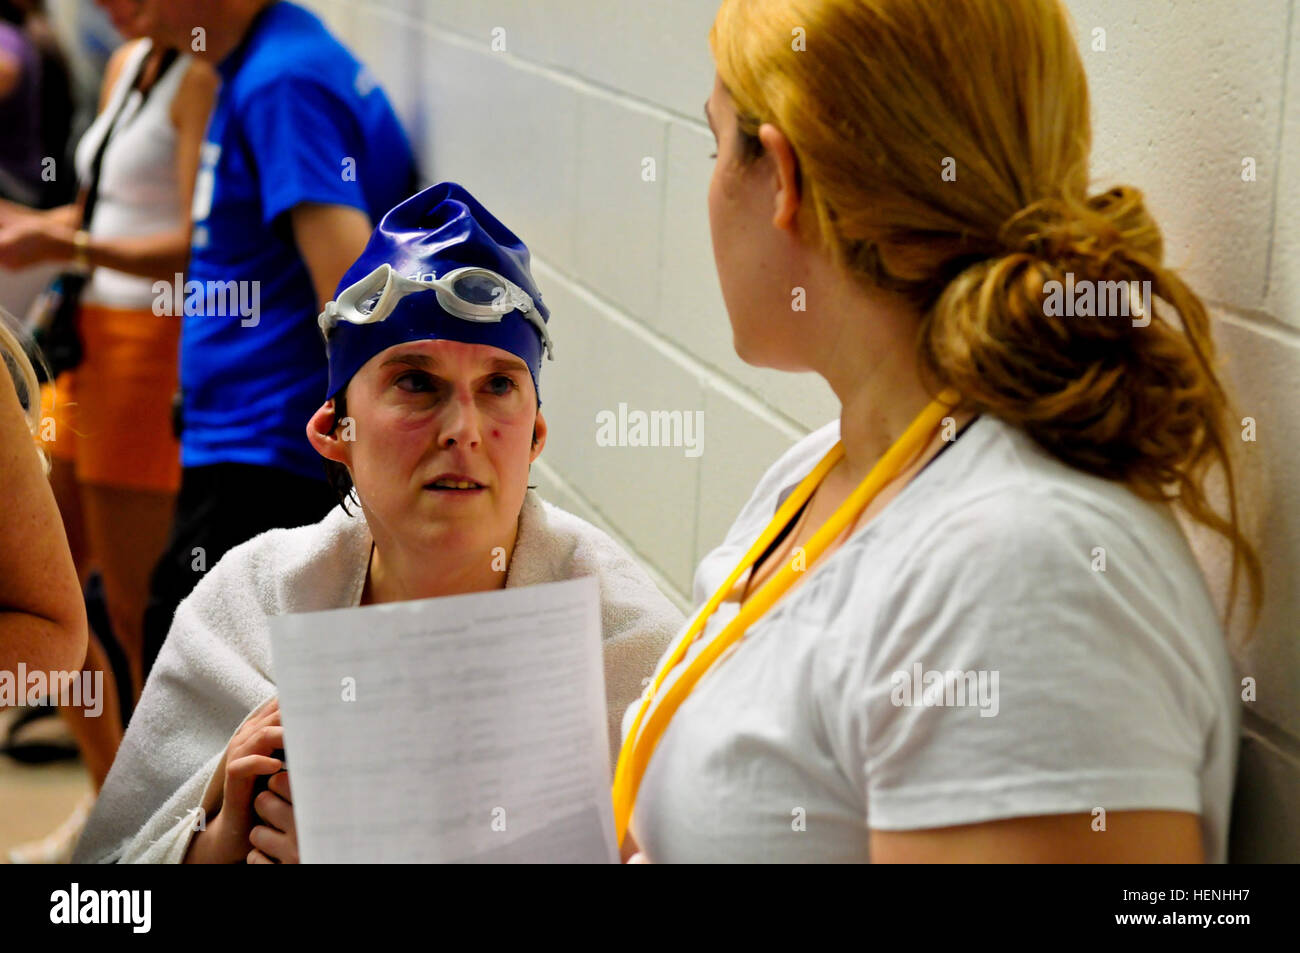 Amy McHugh (left), Enumclaw Bluefins, converses with her coach after her swim heat during the aquatics portion of the 2014 Special Olympics Washington Summer Games at Joint Base Lewis-McChord, Wash., May 31.  JBLM has been the host for the Special Olympics Washington Summer Games for more than four decades. 2014 Special Olympics Washington Summer Games 140531-A-UG106-010 Stock Photo